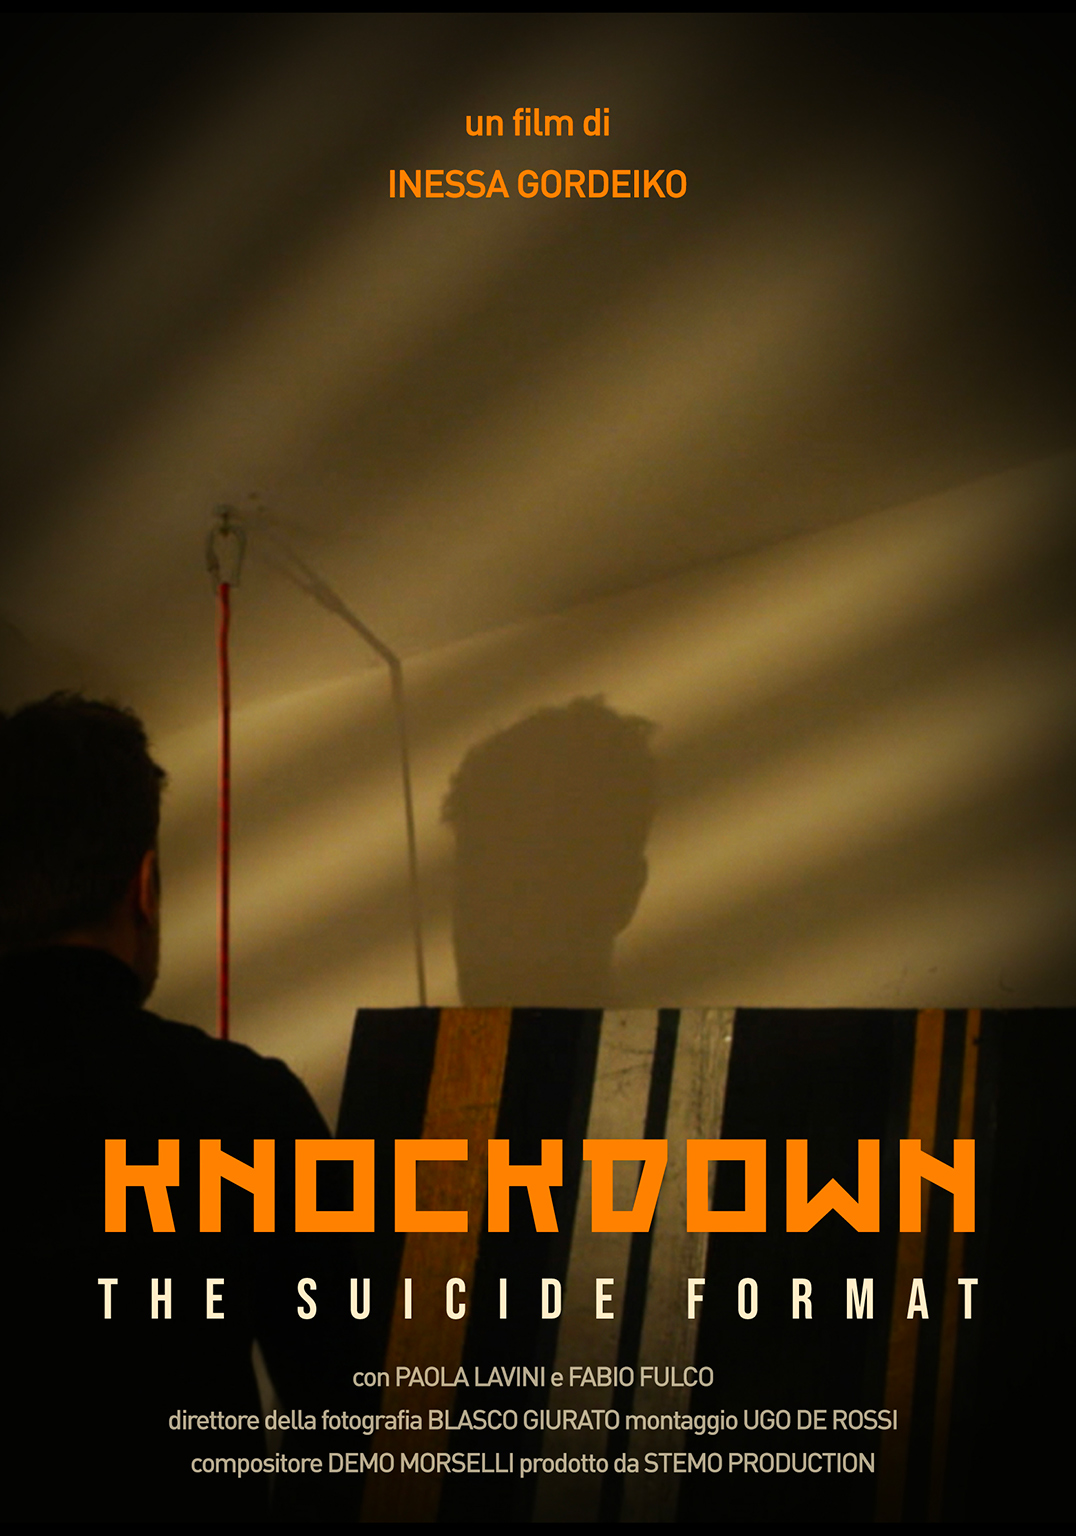 KNOCKDOWN: THE SUICIDE FORMAT